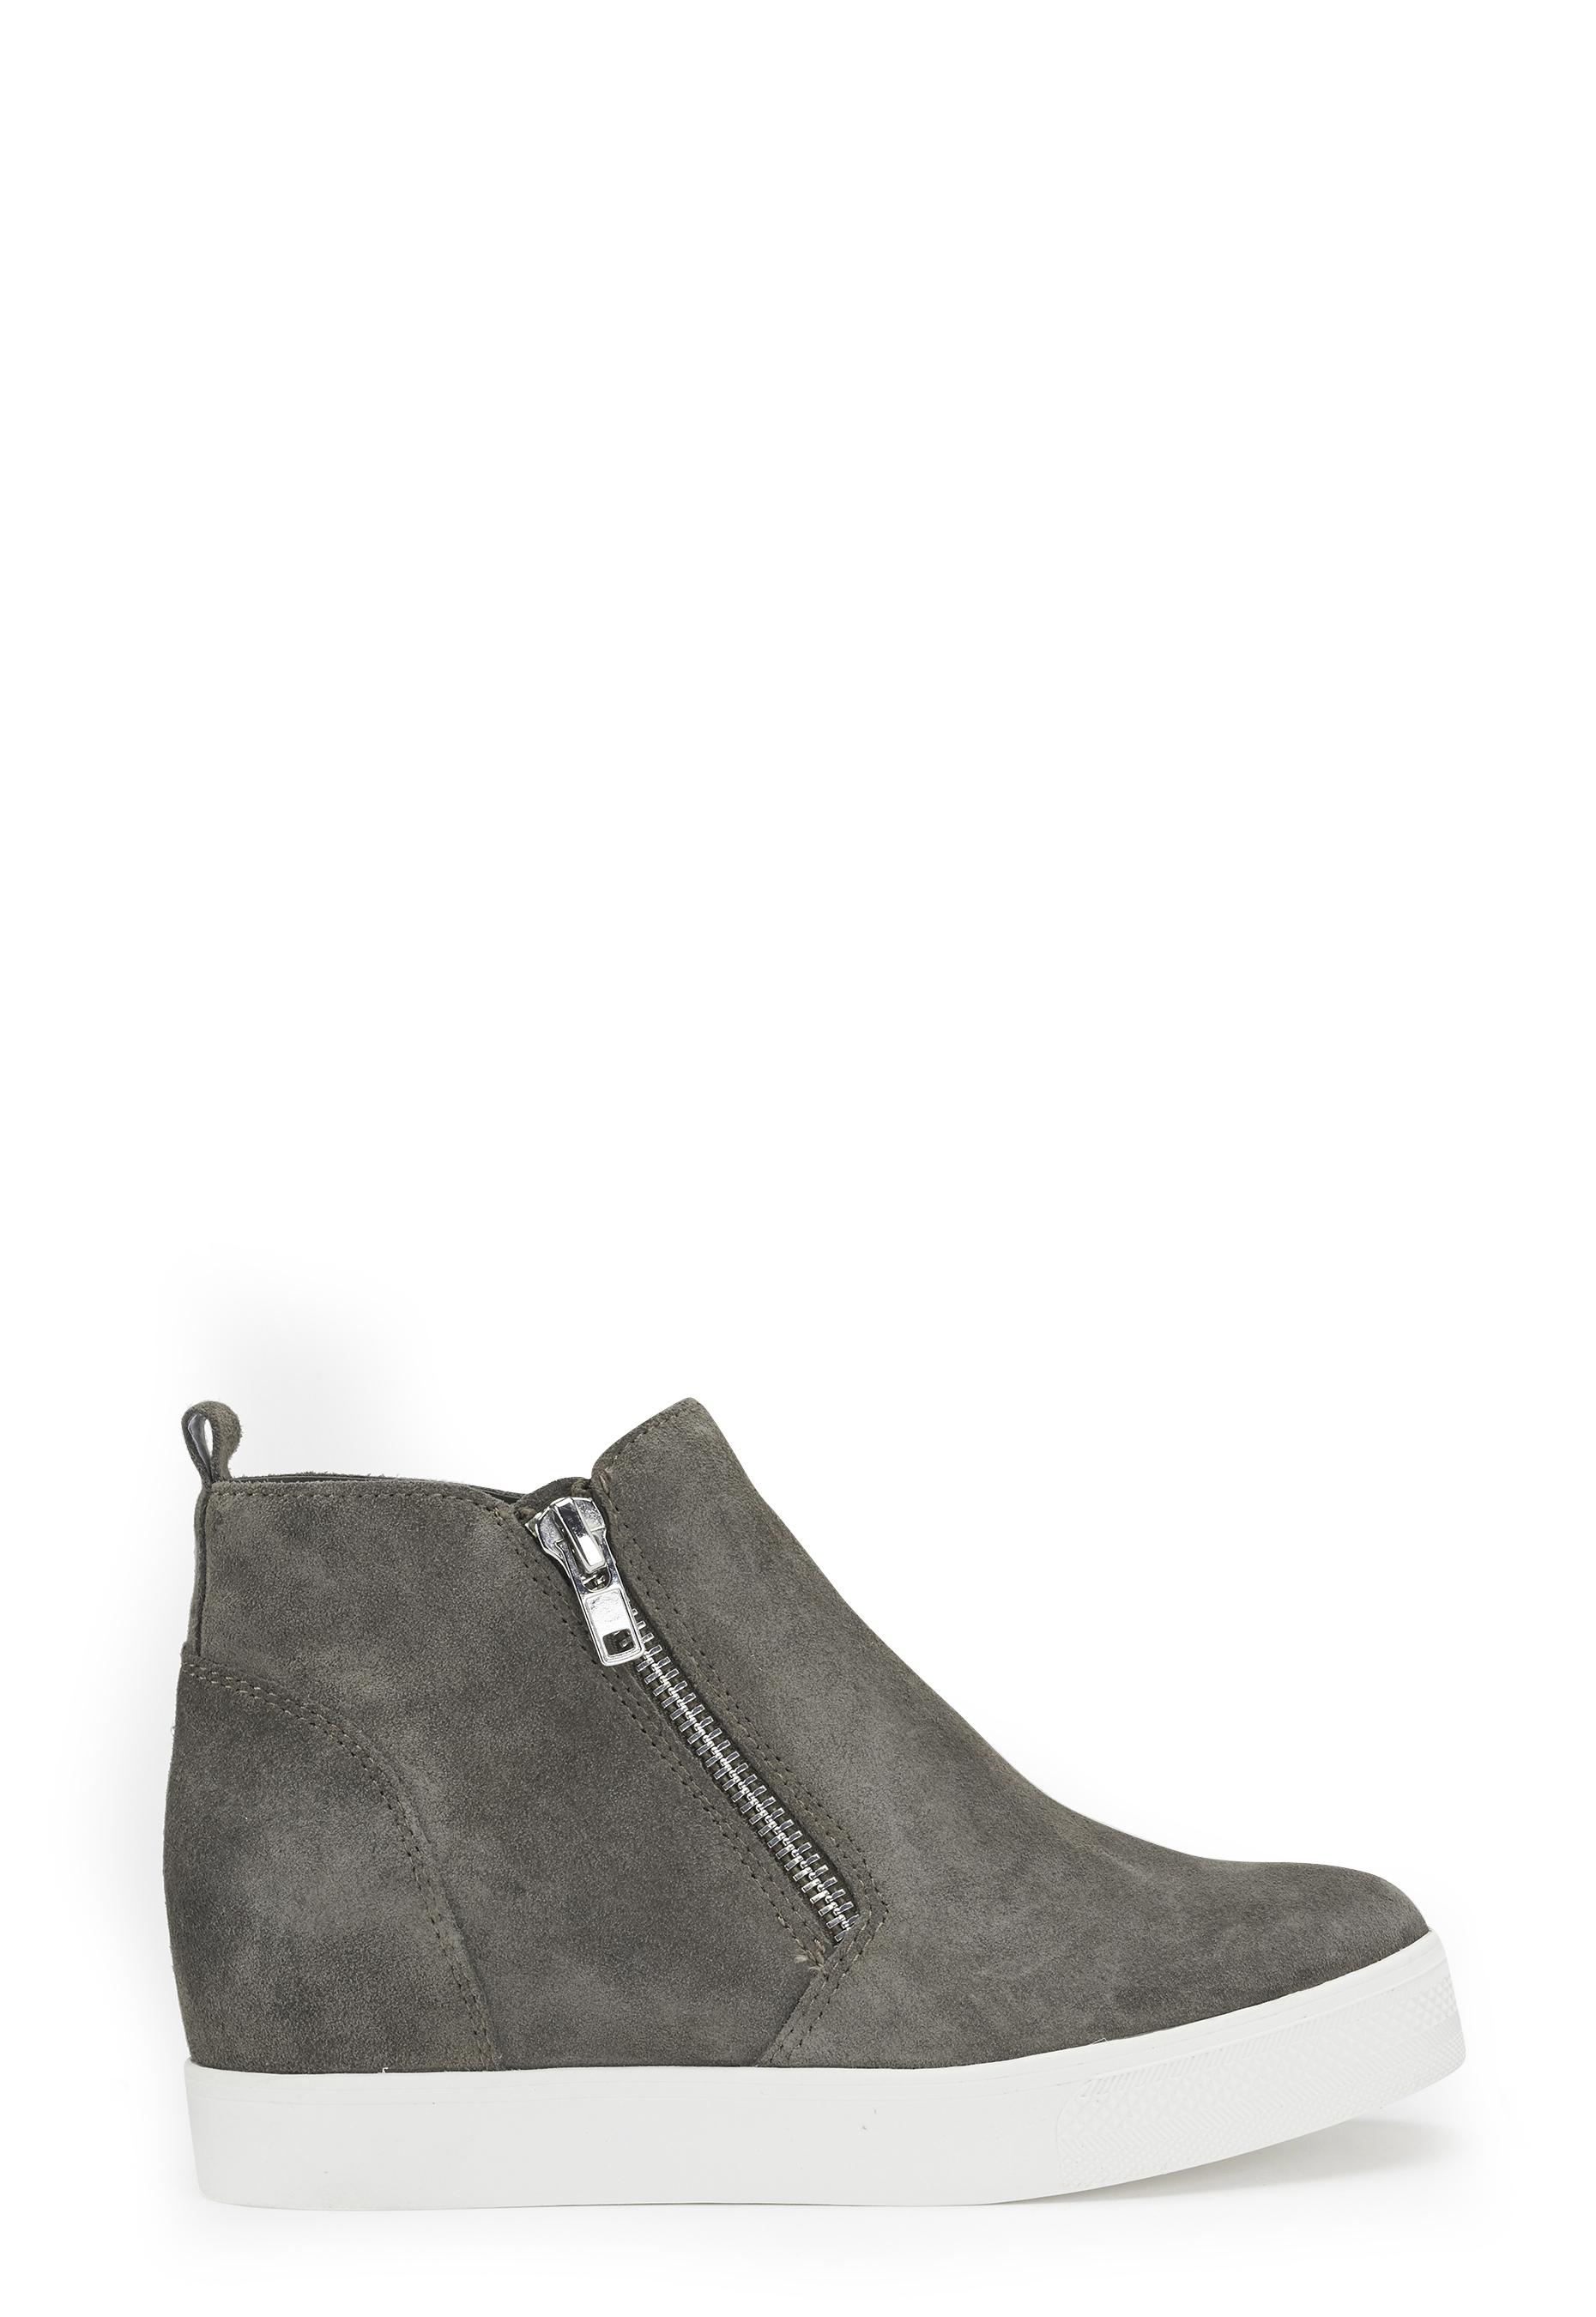 steve madden wedgie p taupe suede